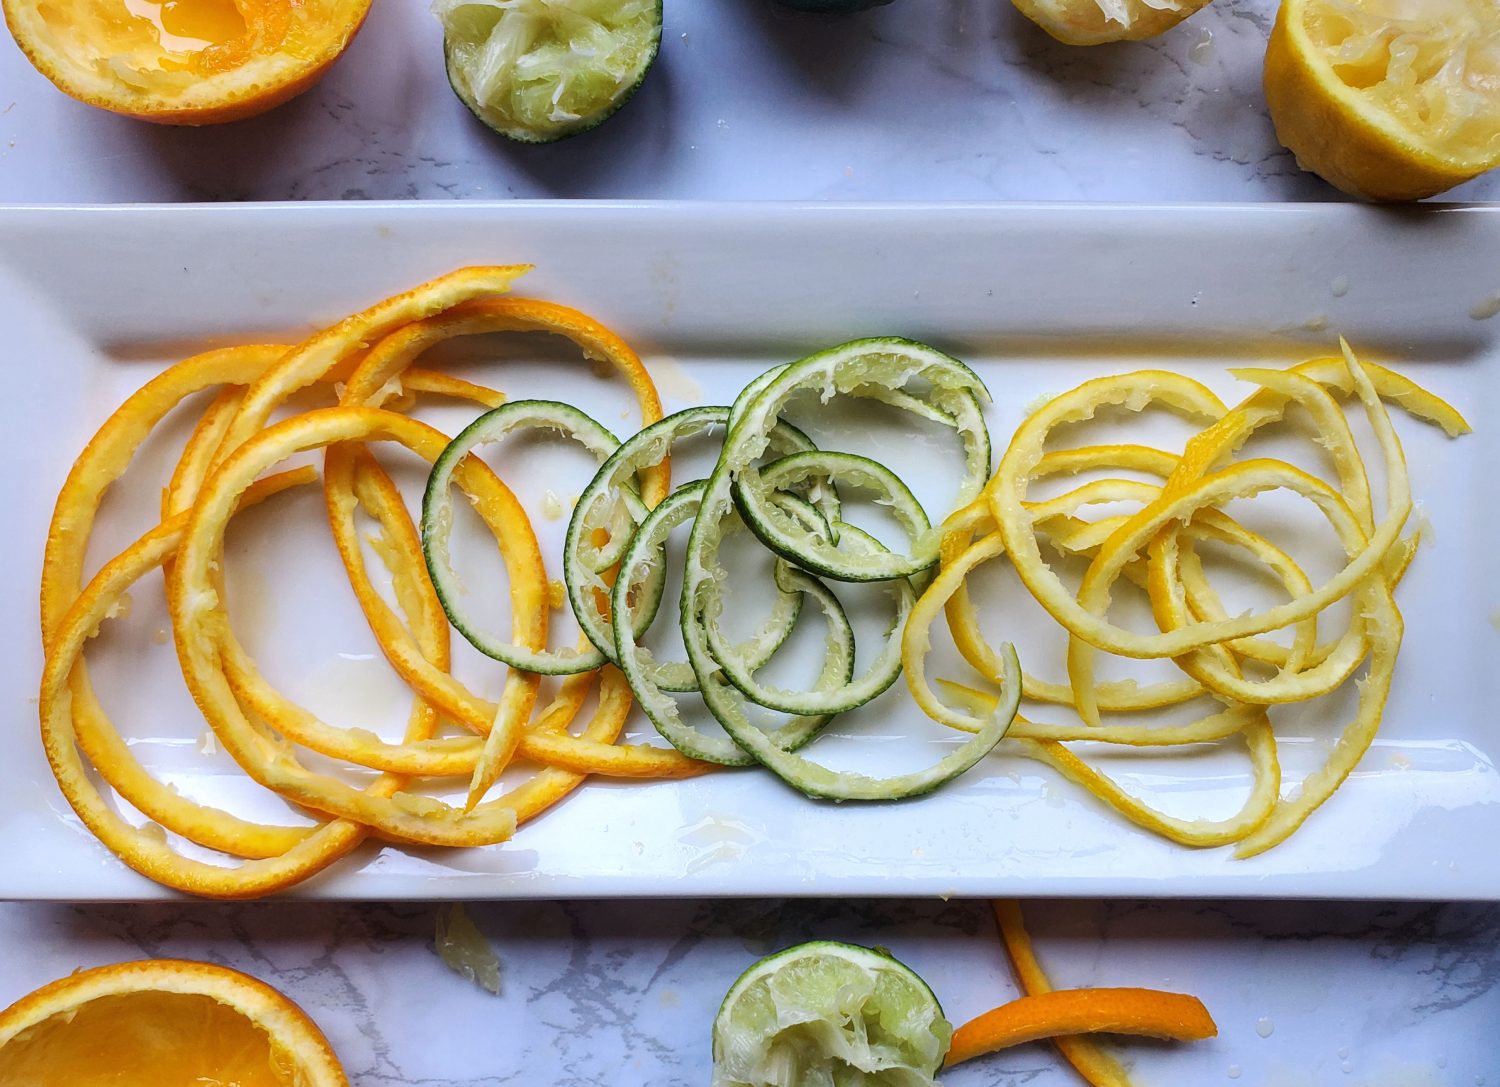 Make your desserts even prettier with some easy to make citrus curls! Don't stop at desserts; these cute and easy curls will make your great food stunning!